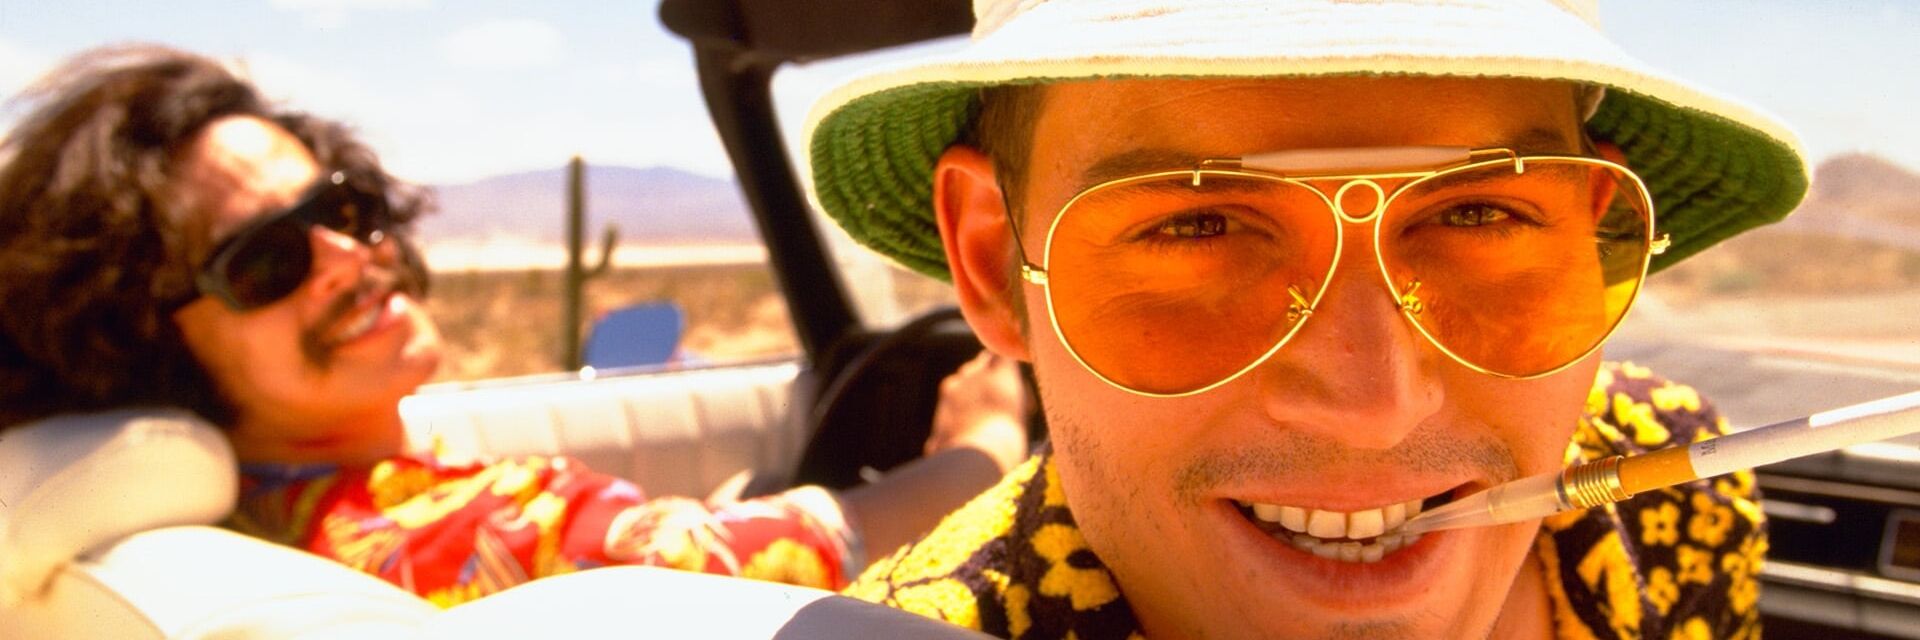 Fear and Loathing in Las Vegas (1998) – 25th anniversary